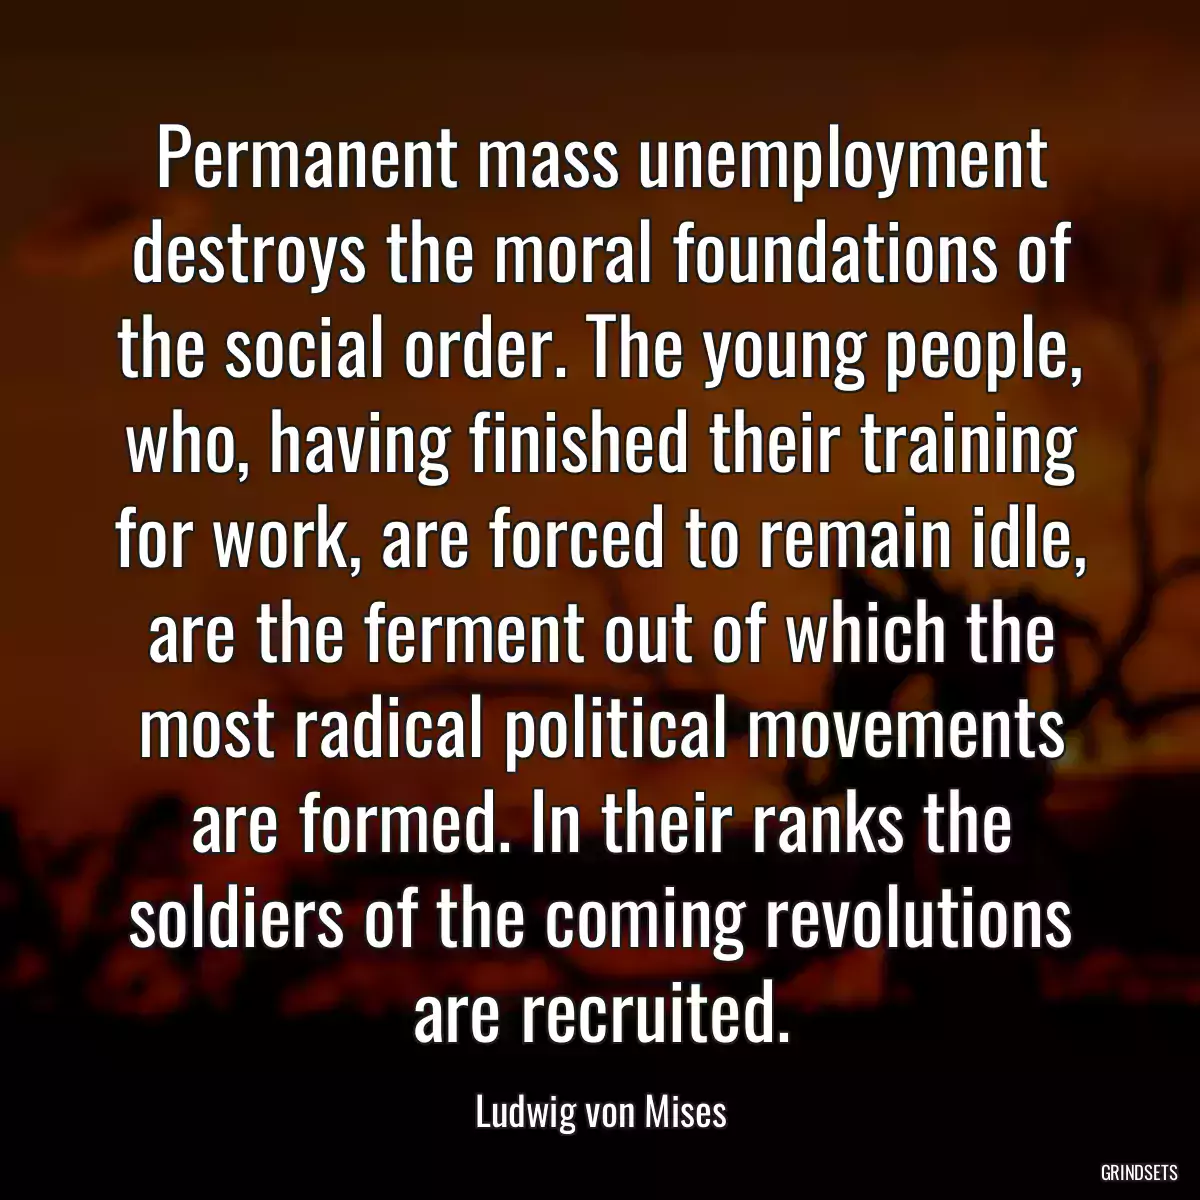 Permanent mass unemployment destroys the moral foundations of the social order. The young people, who, having finished their training for work, are forced to remain idle, are the ferment out of which the most radical political movements are formed. In their ranks the soldiers of the coming revolutions are recruited.